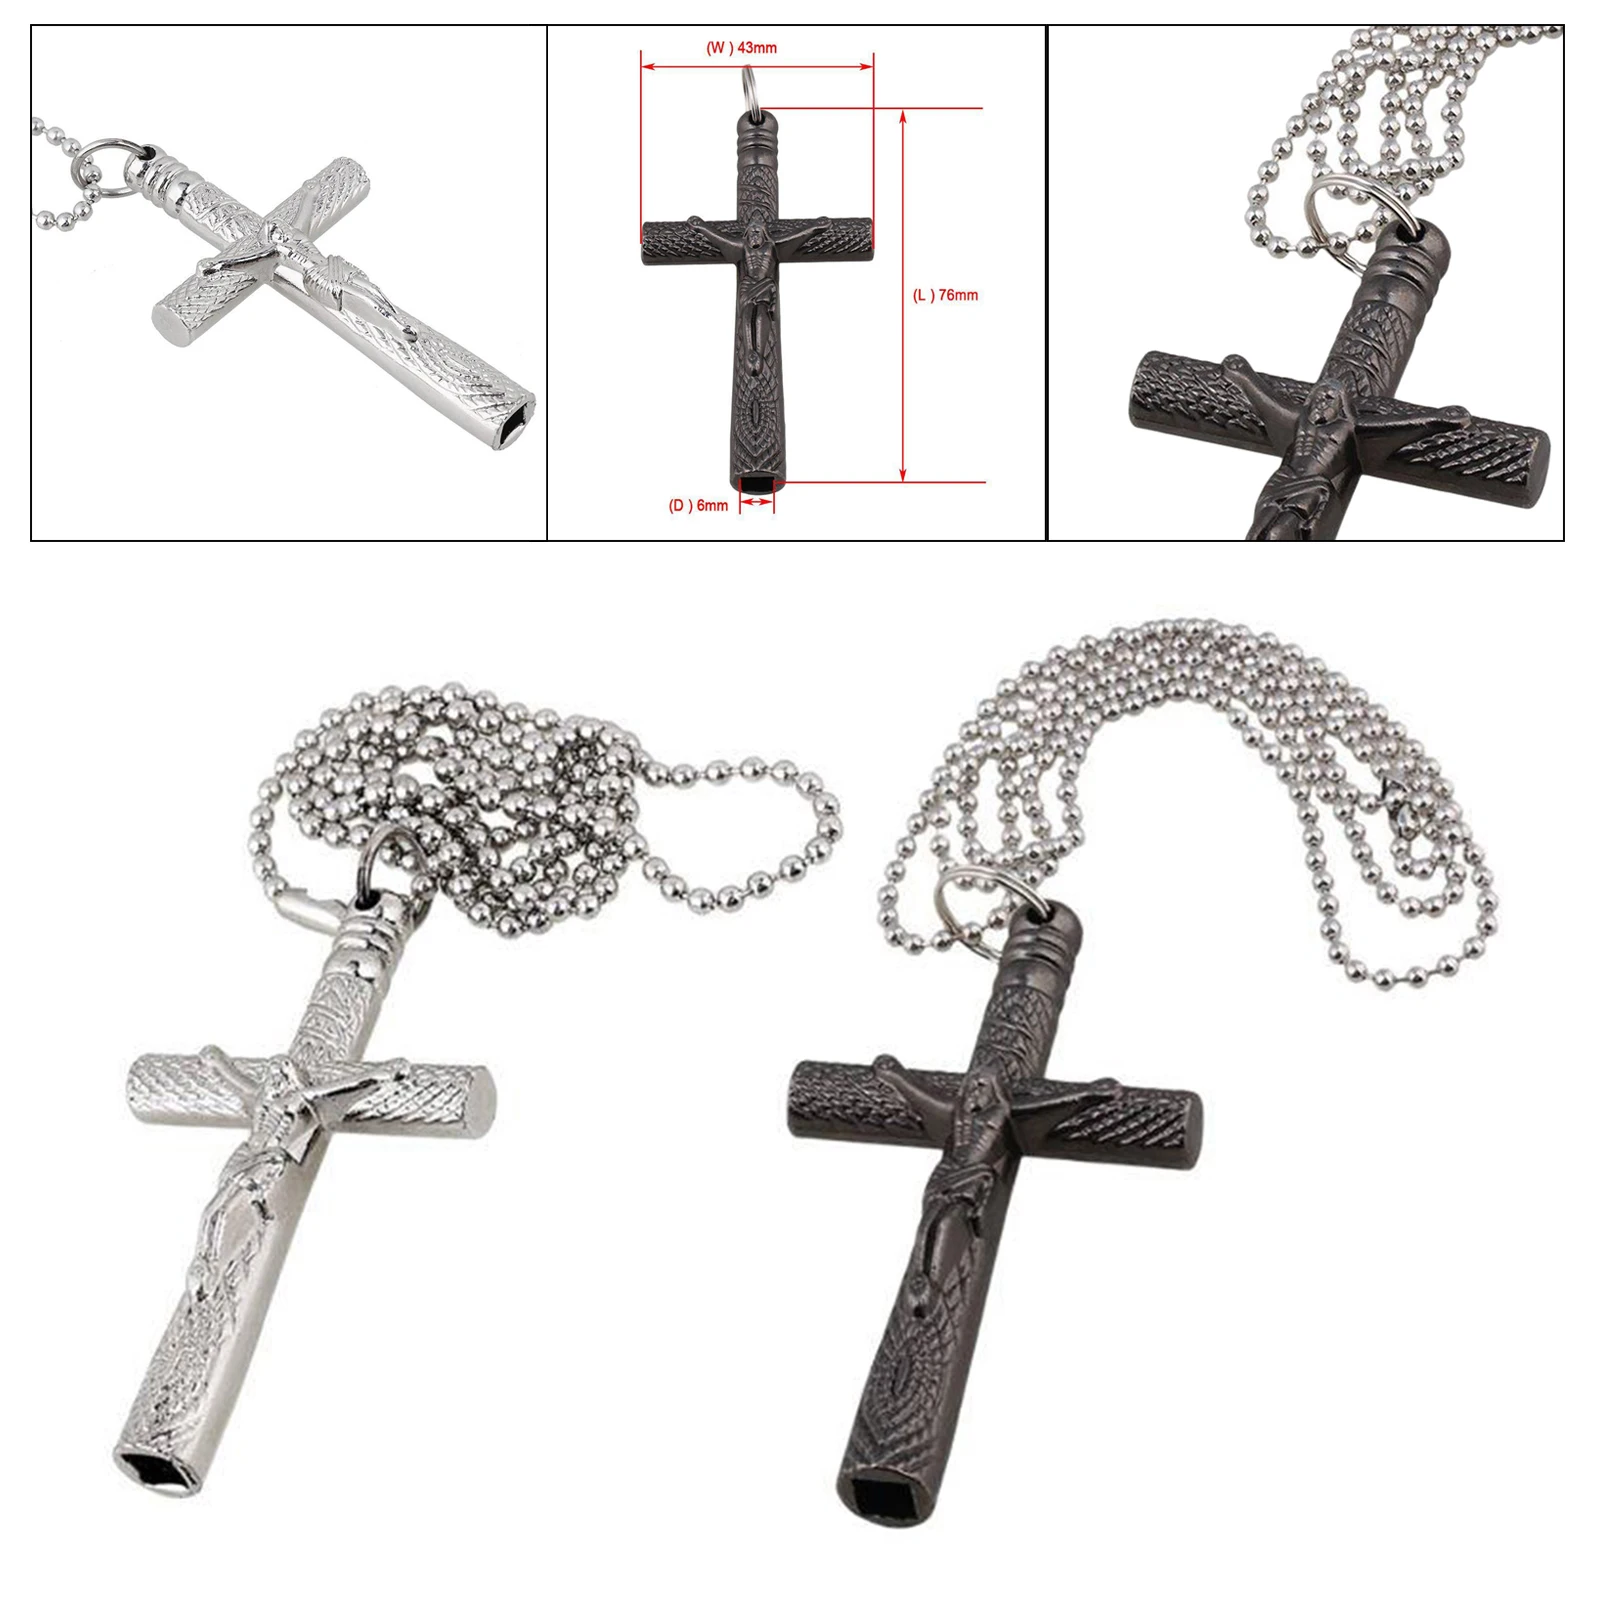 Steel Cross Drum Tuning Key Necklace Pendant Wrench Instruments Parts Accs